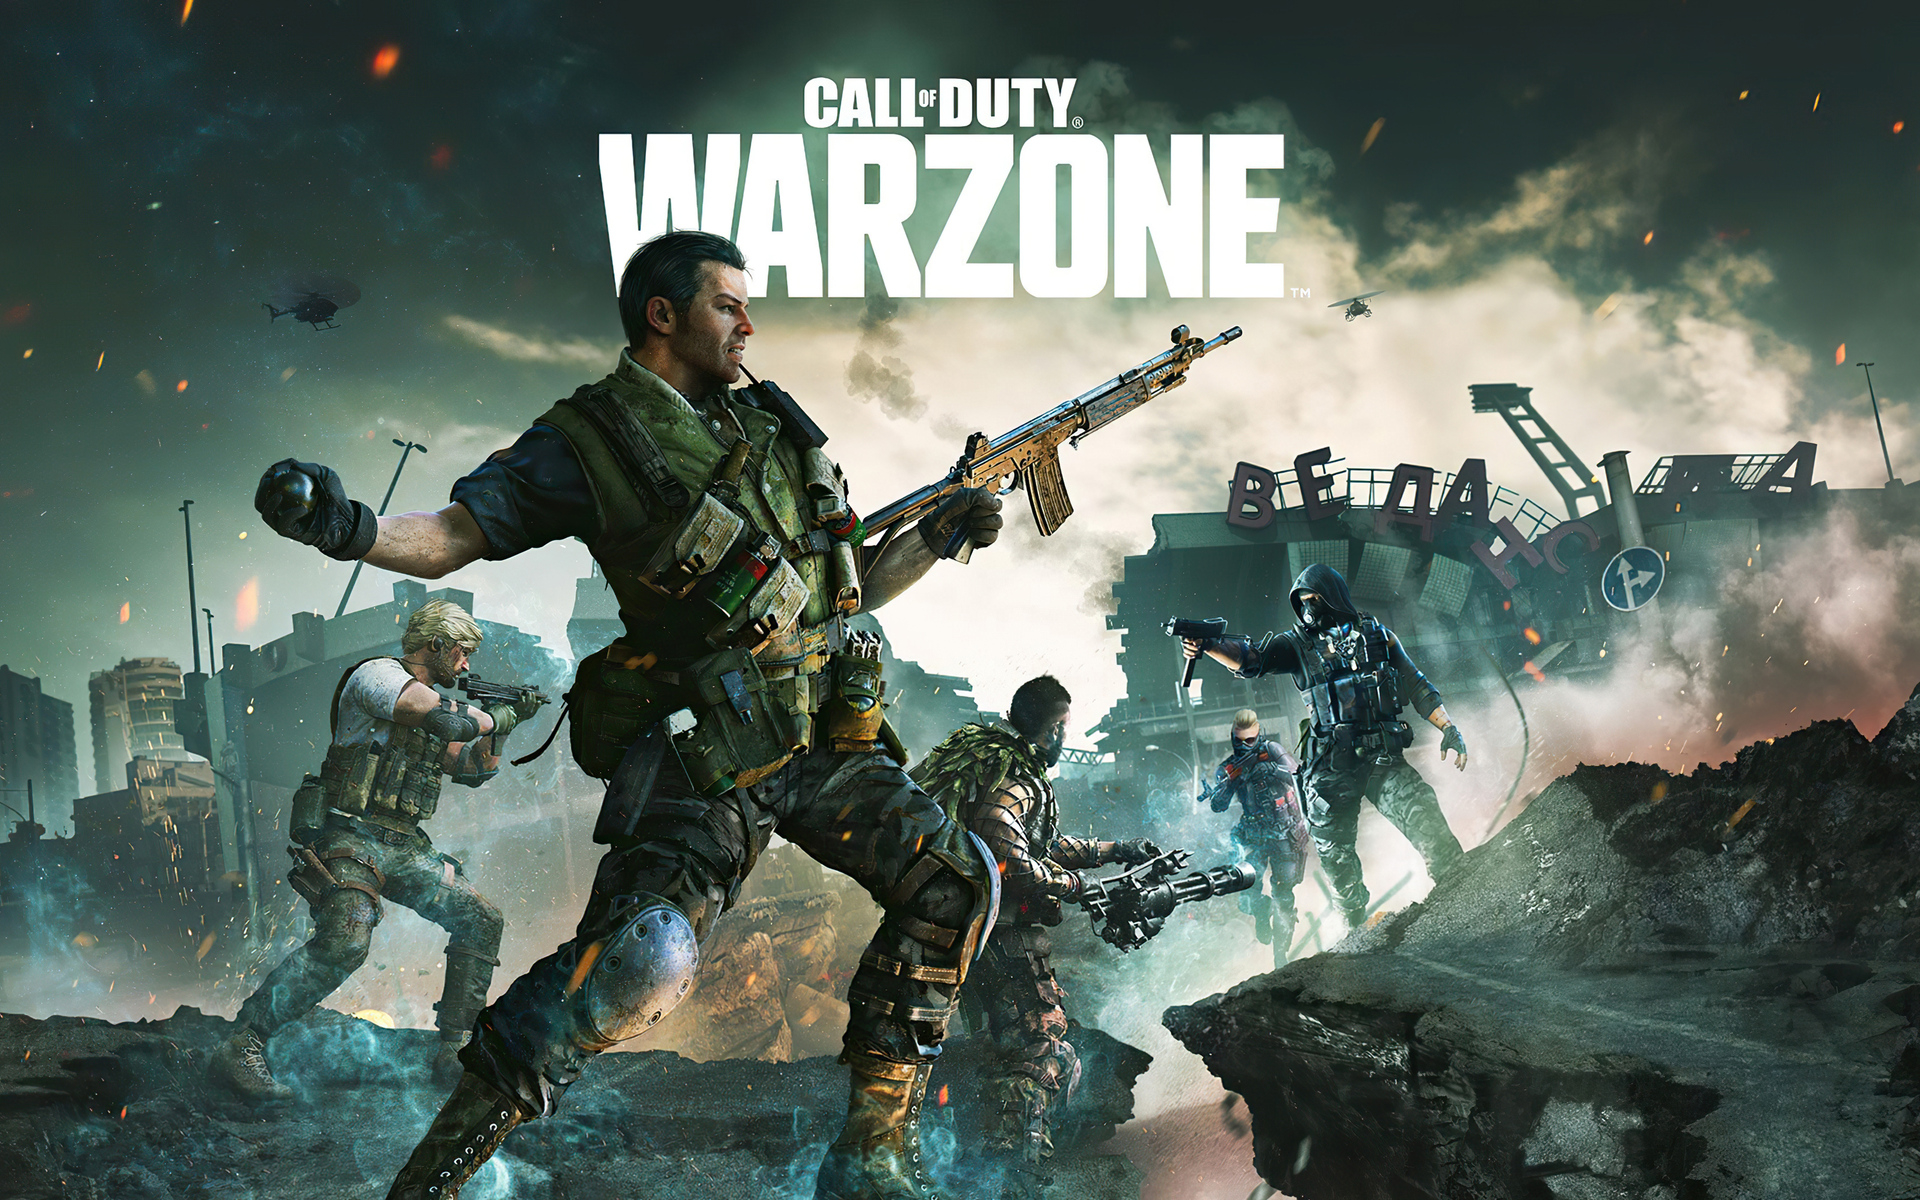 3840x21602021 Gaming Poster Of Call Of Duty Warzone 3840x21602021